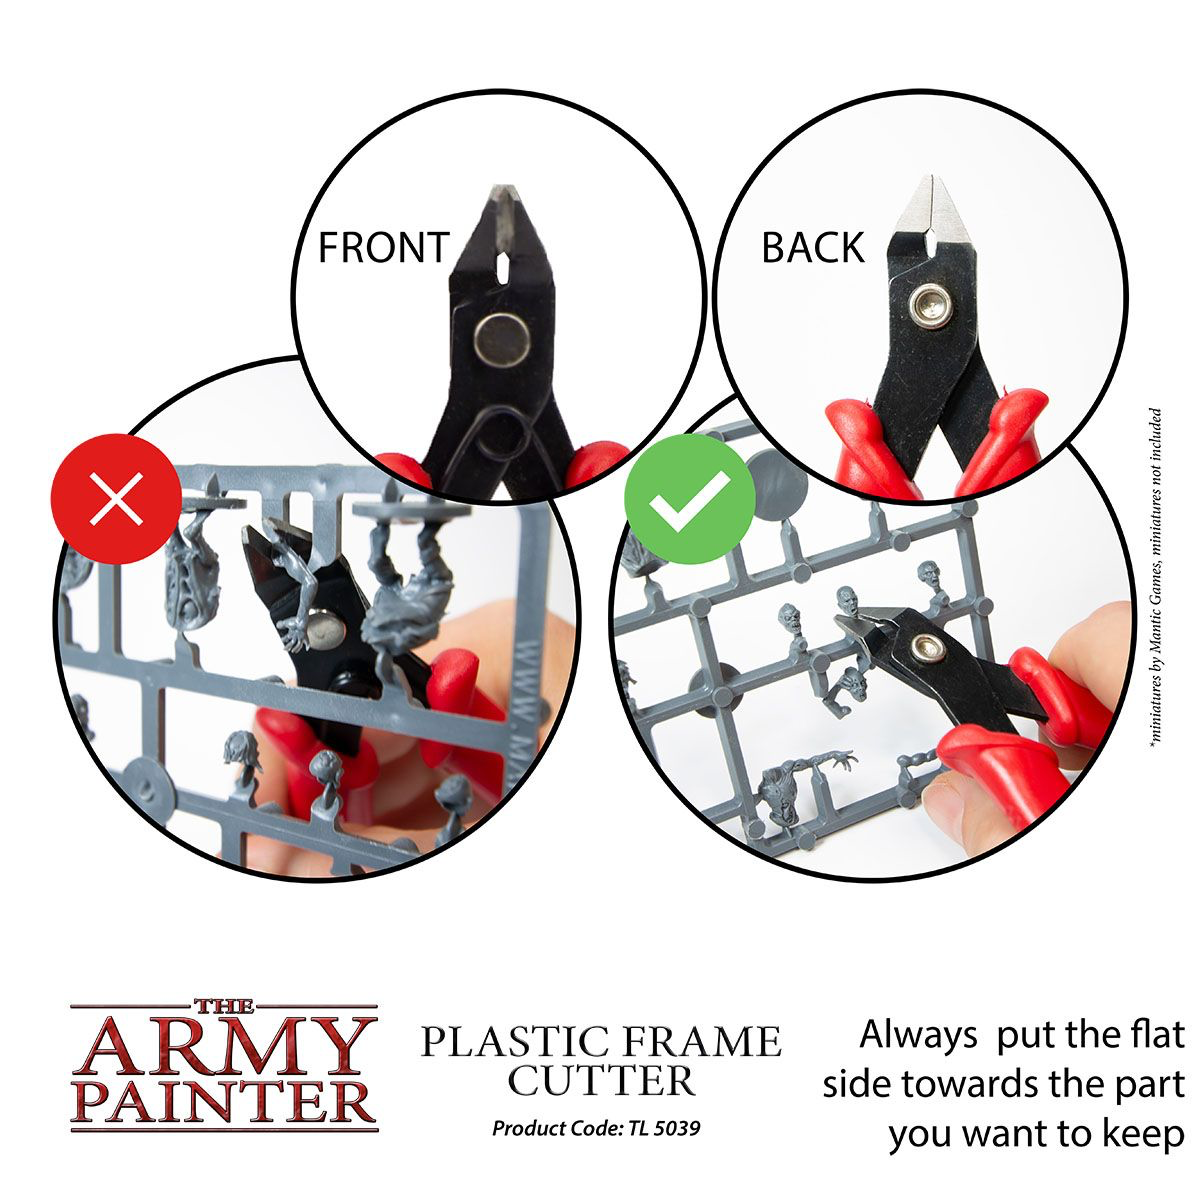 The Army Painter: Plastic Frame Cutter